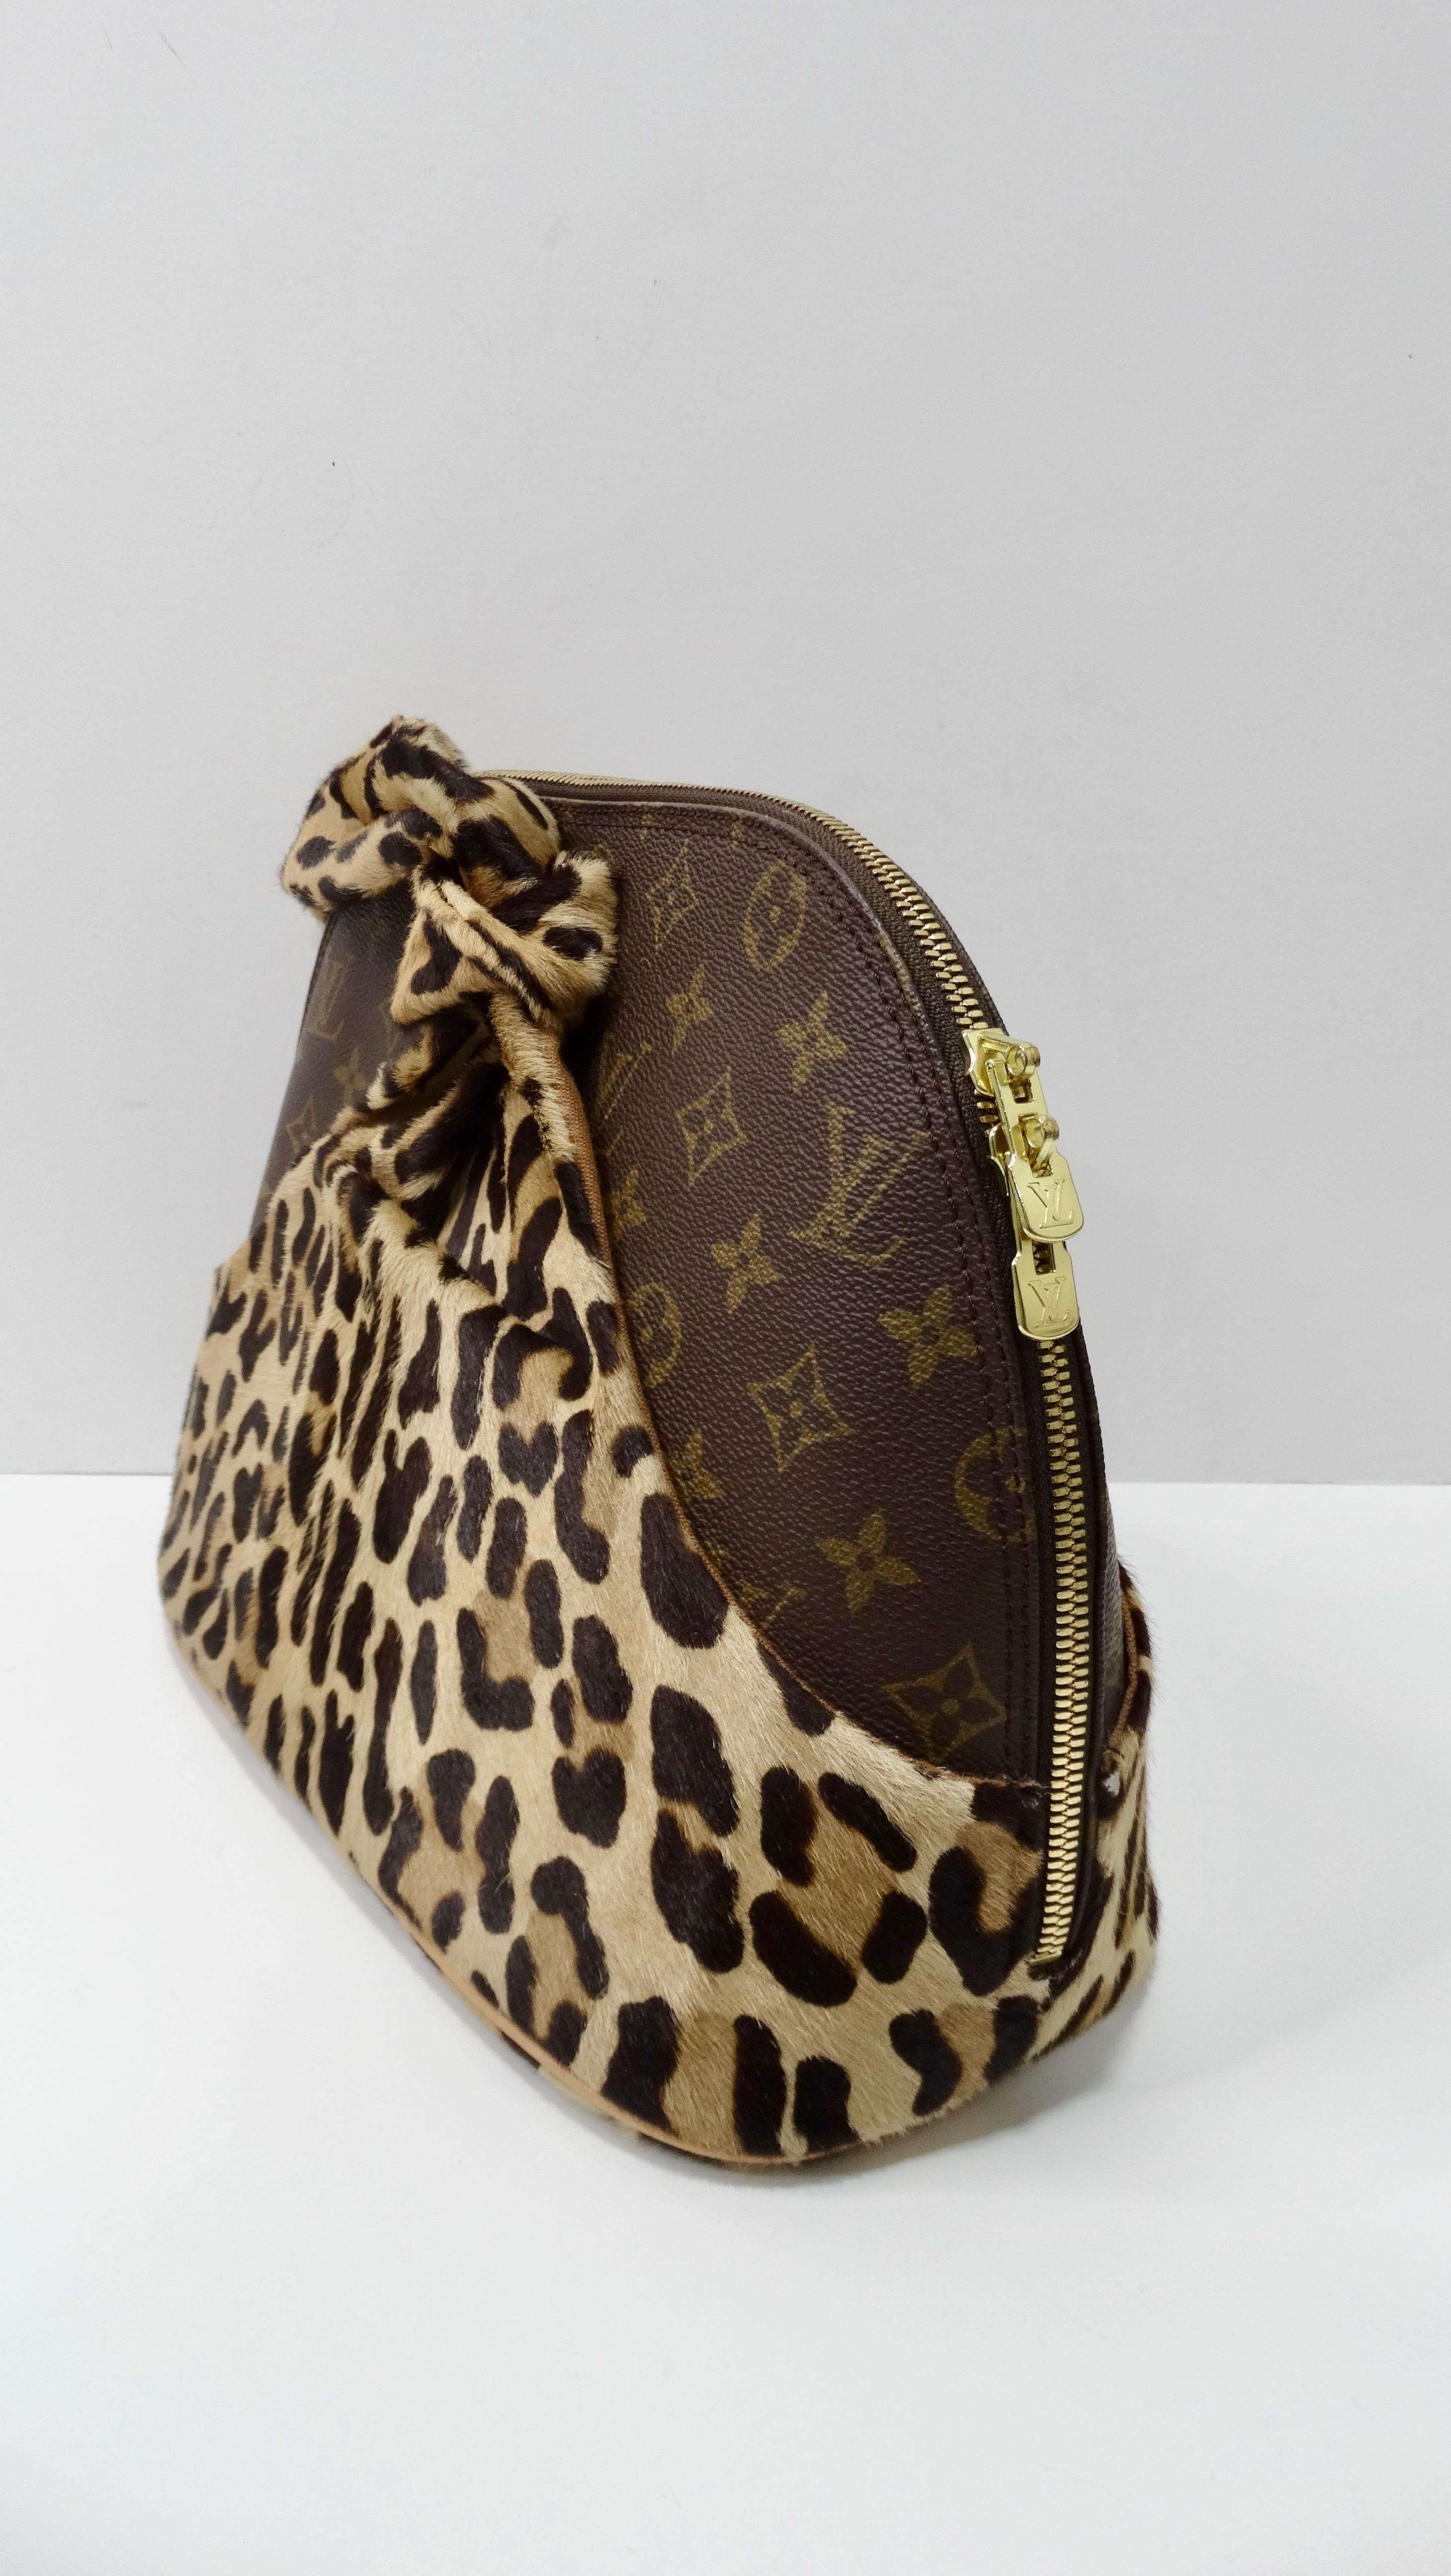 Complete your bag collection with this amazing Louis Vuitton x Azzedine Alaia Leopard Alma! Circa 1996, this limited edition collaboration from the 'Centenaire' 100th Anniversary Collection features the iconic Louis Vuitton Alma bag encased in